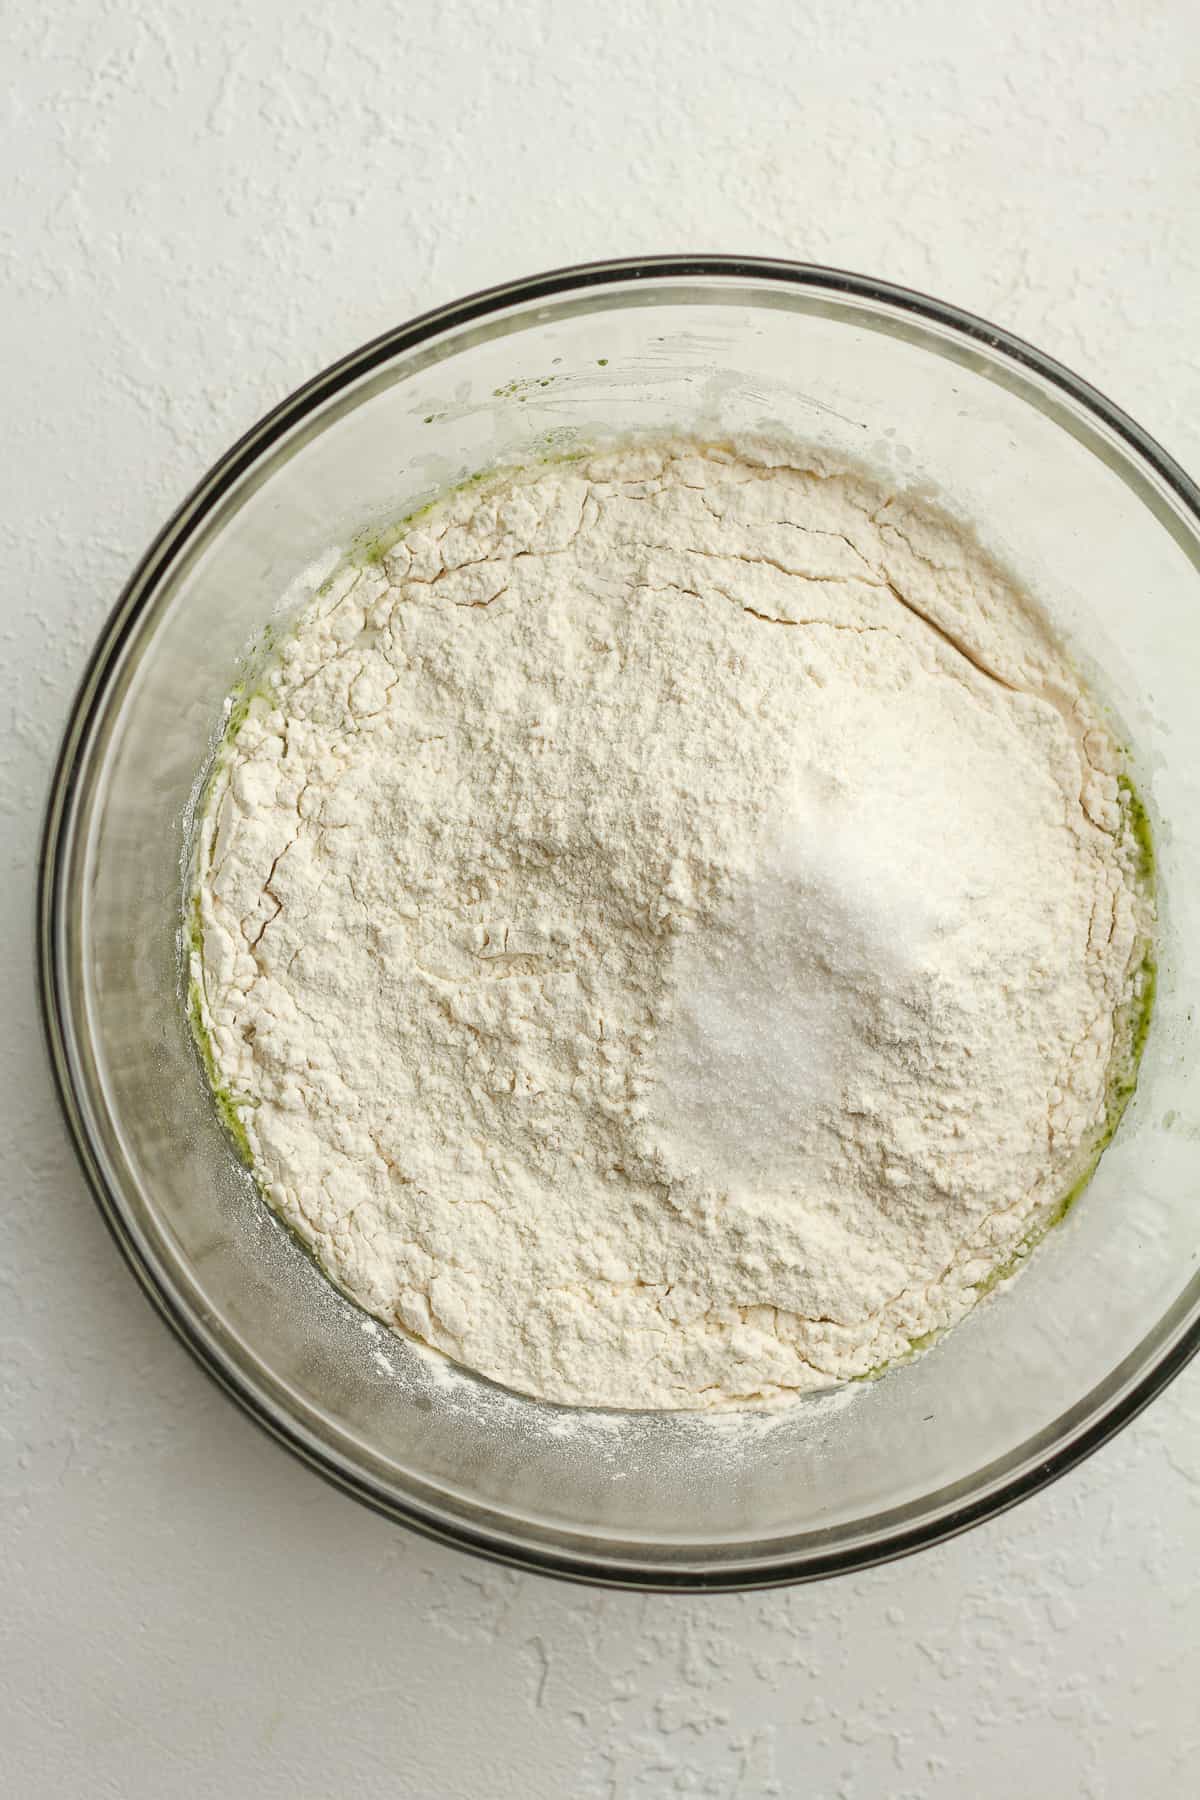 The sourdough mixture with flour and salt on top.